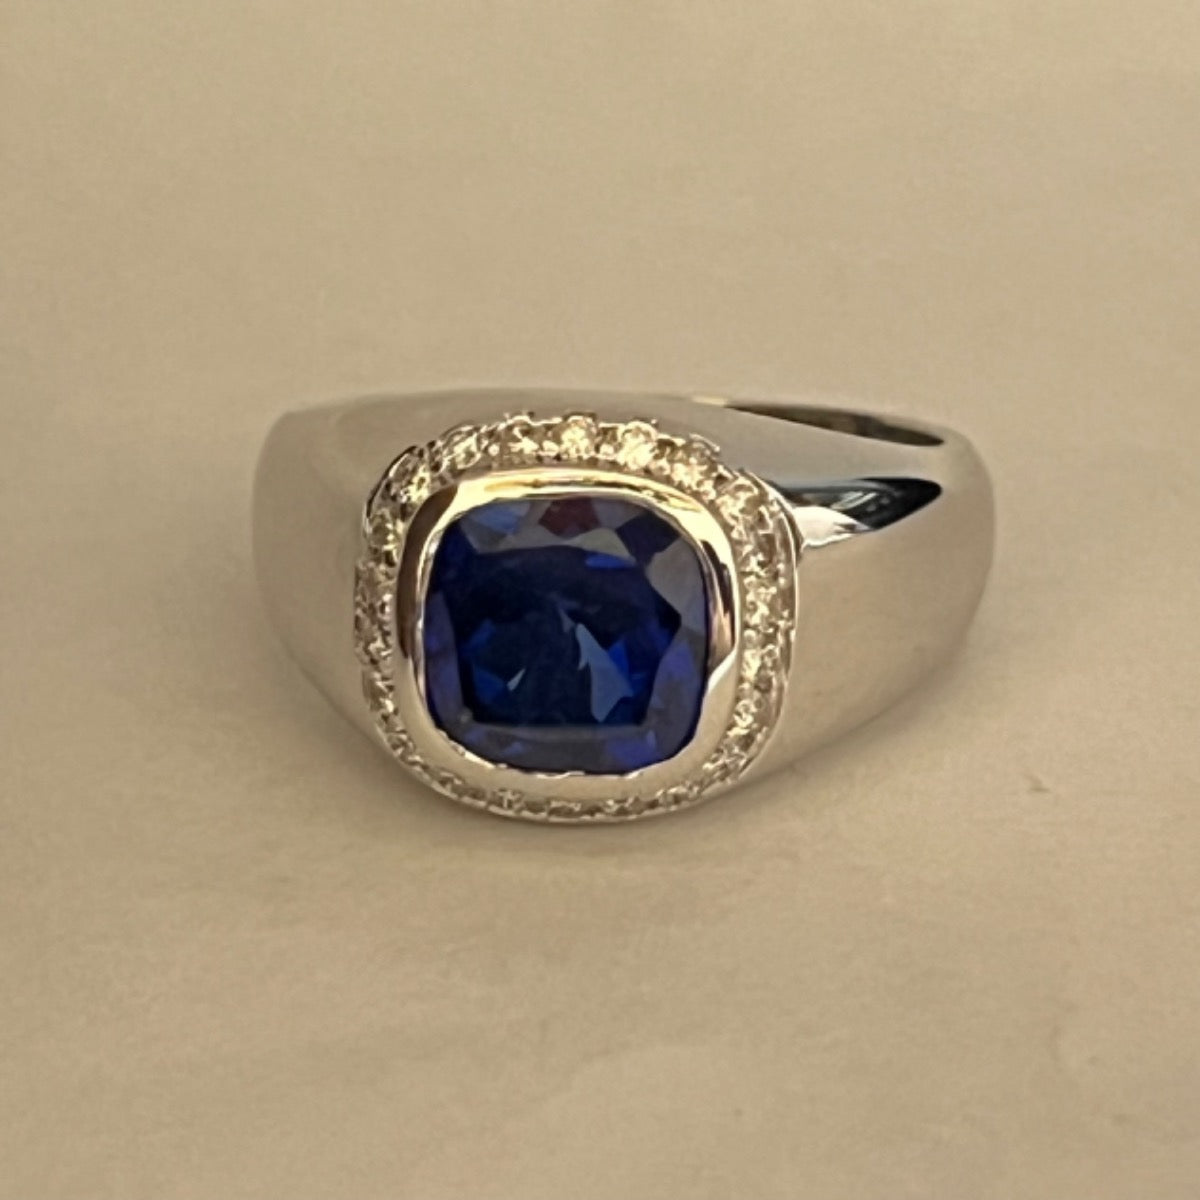 14K White Gold  Men's Ring with Sapphire and Diamond